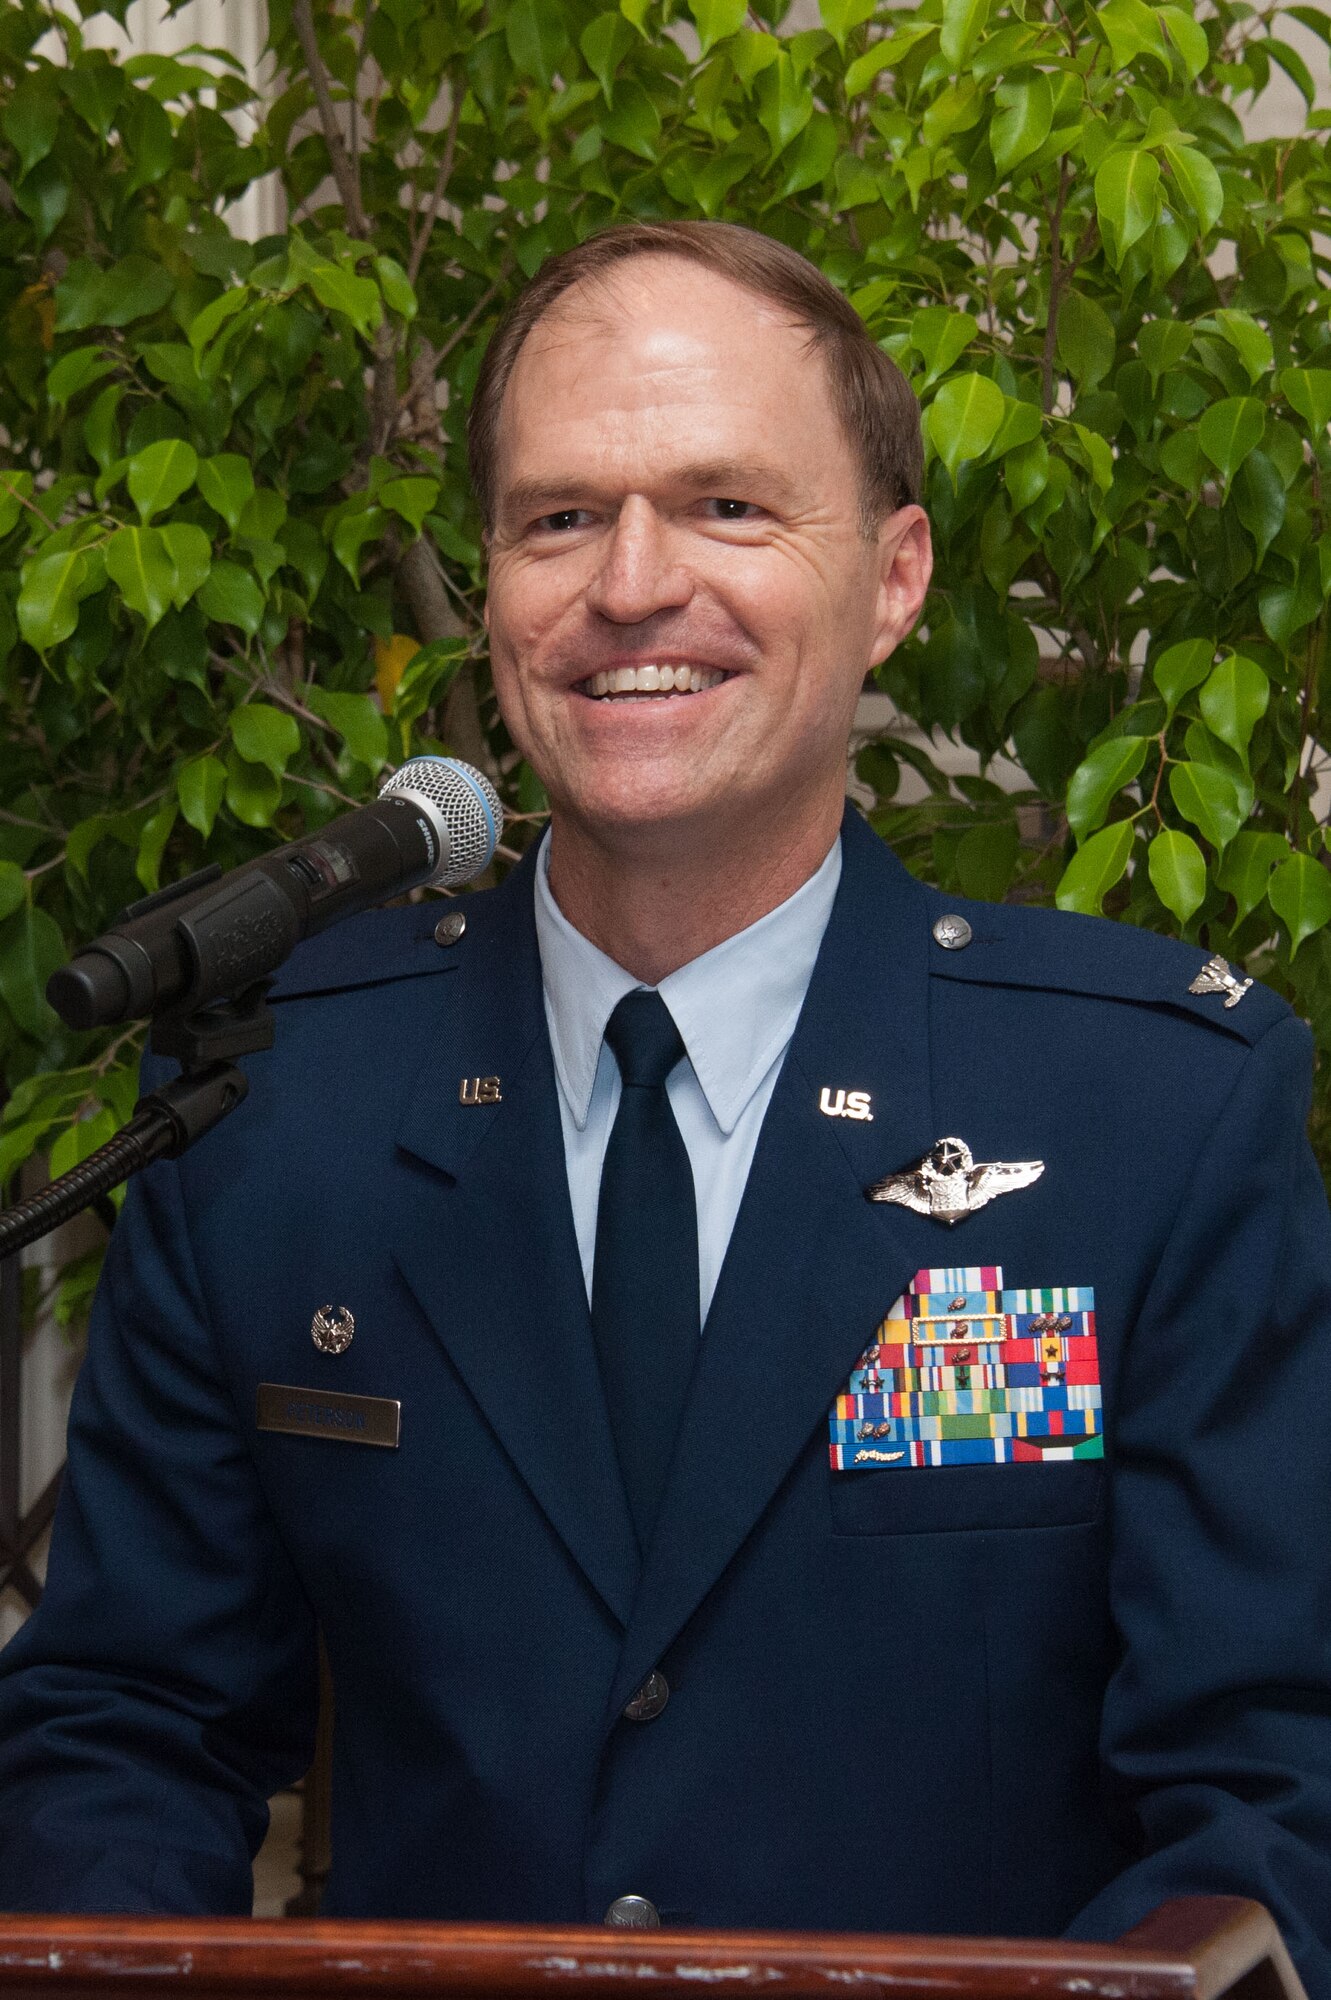 Air Force Col. Michael Peterson, speaks during the International Honor Roll induction ceremony on Maxwell Air Force Base, Ala., Feb. 3, 2016. The ceremony was held to honor select alumni attending the International Officer School at the Carl A. Spaatz Center for Officer Education, who have attained a prominent position in their country. 